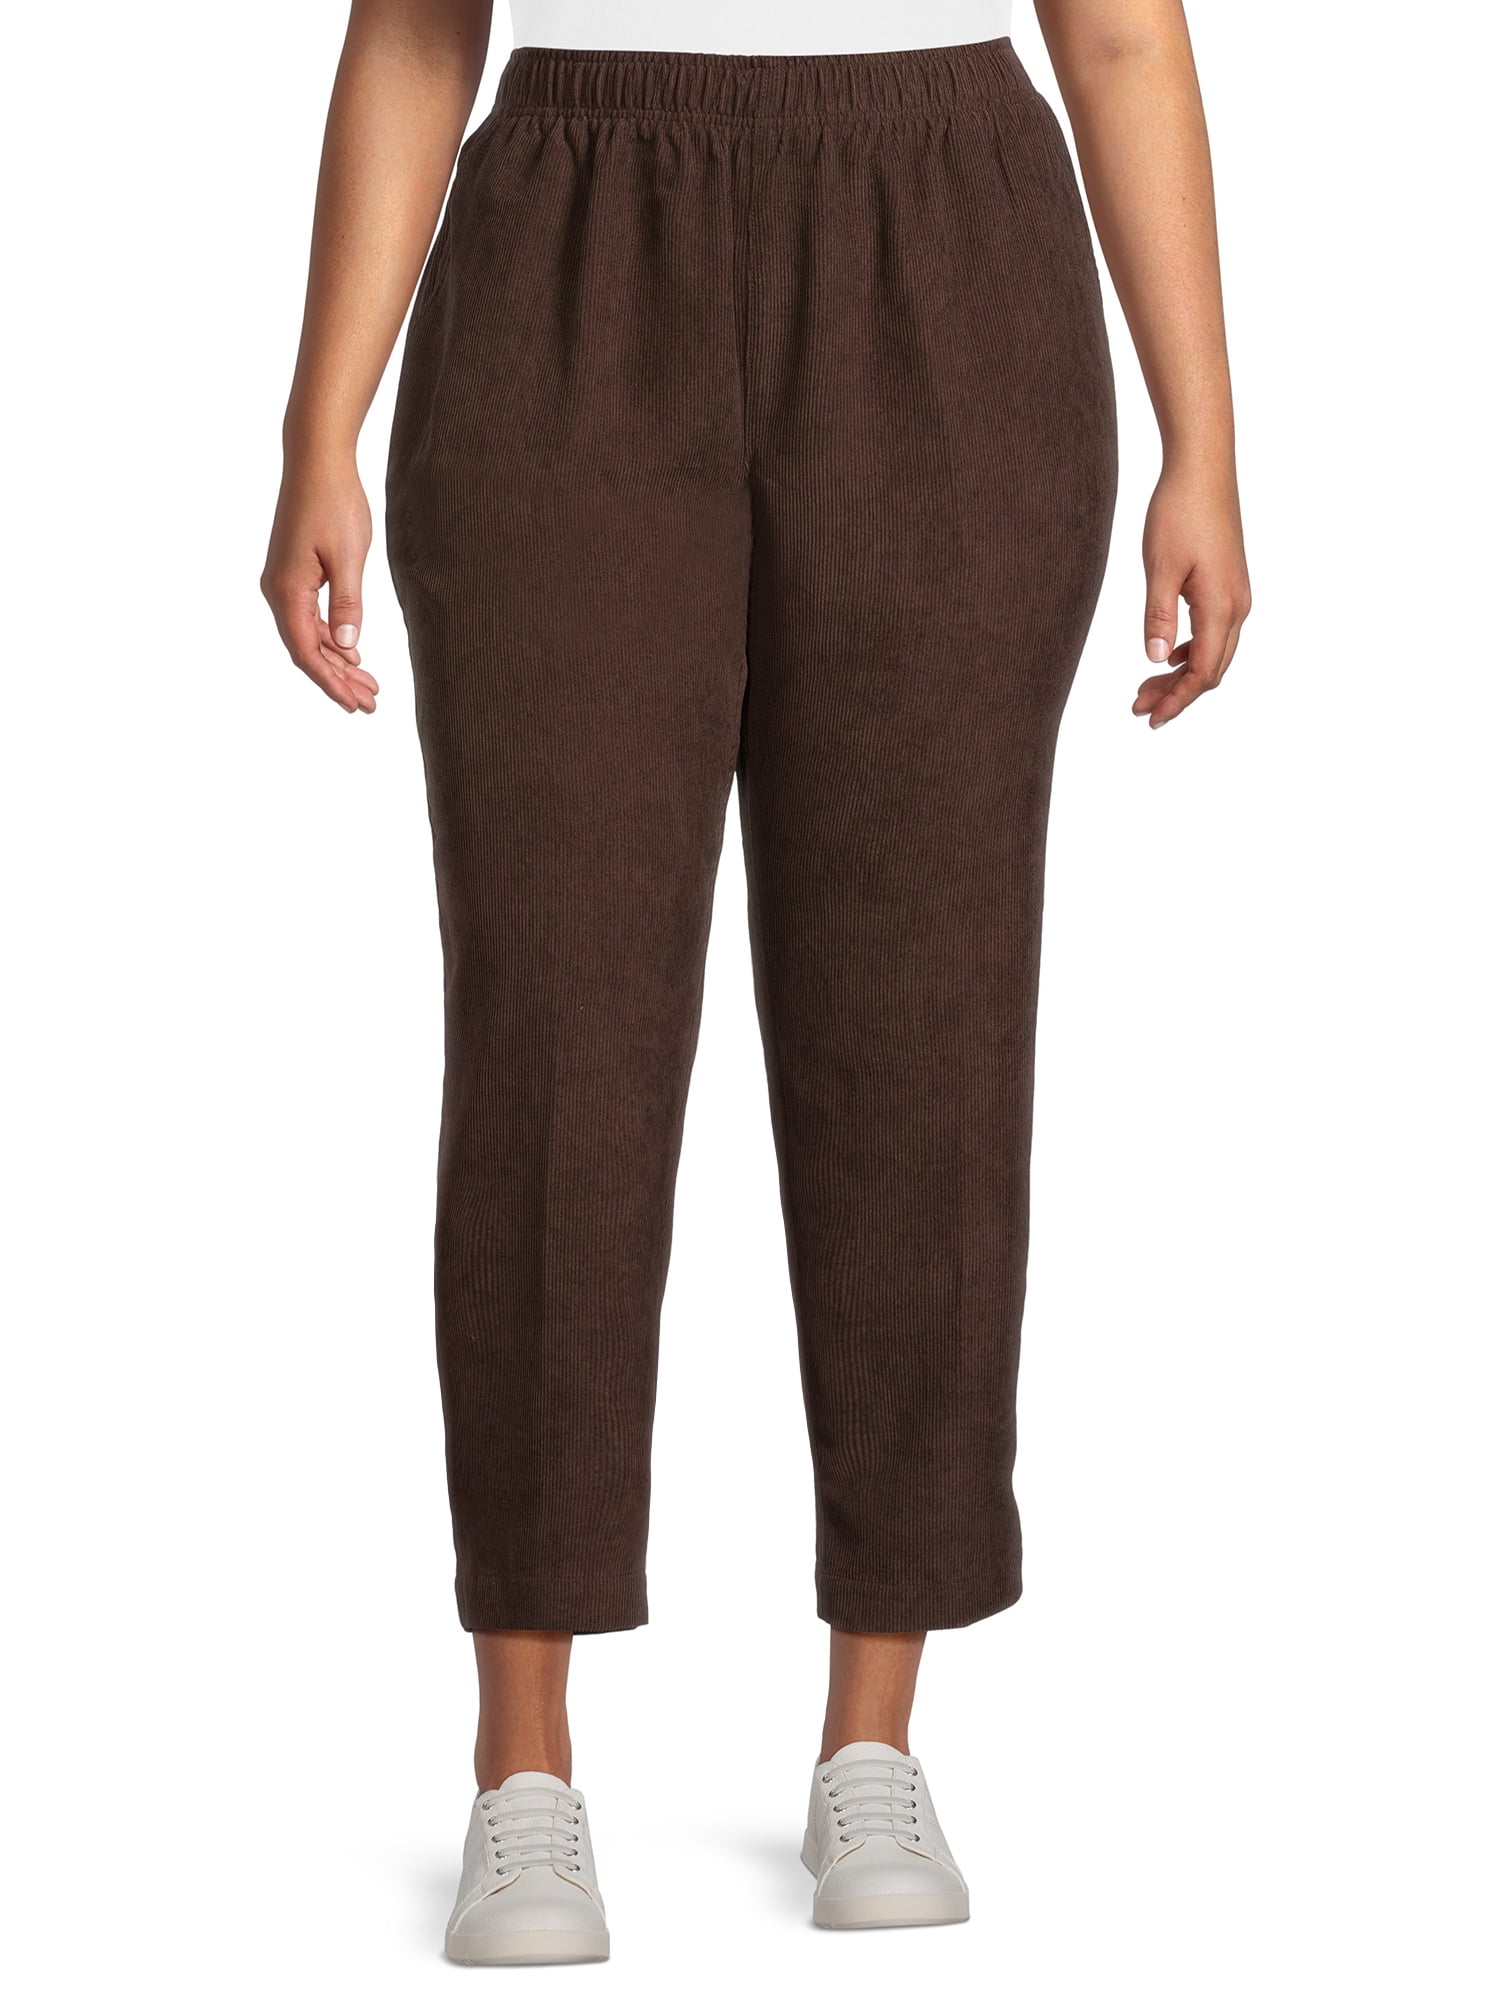 Just My Size Women's Plus Size Corduroy Pull-On Pants with Pockets